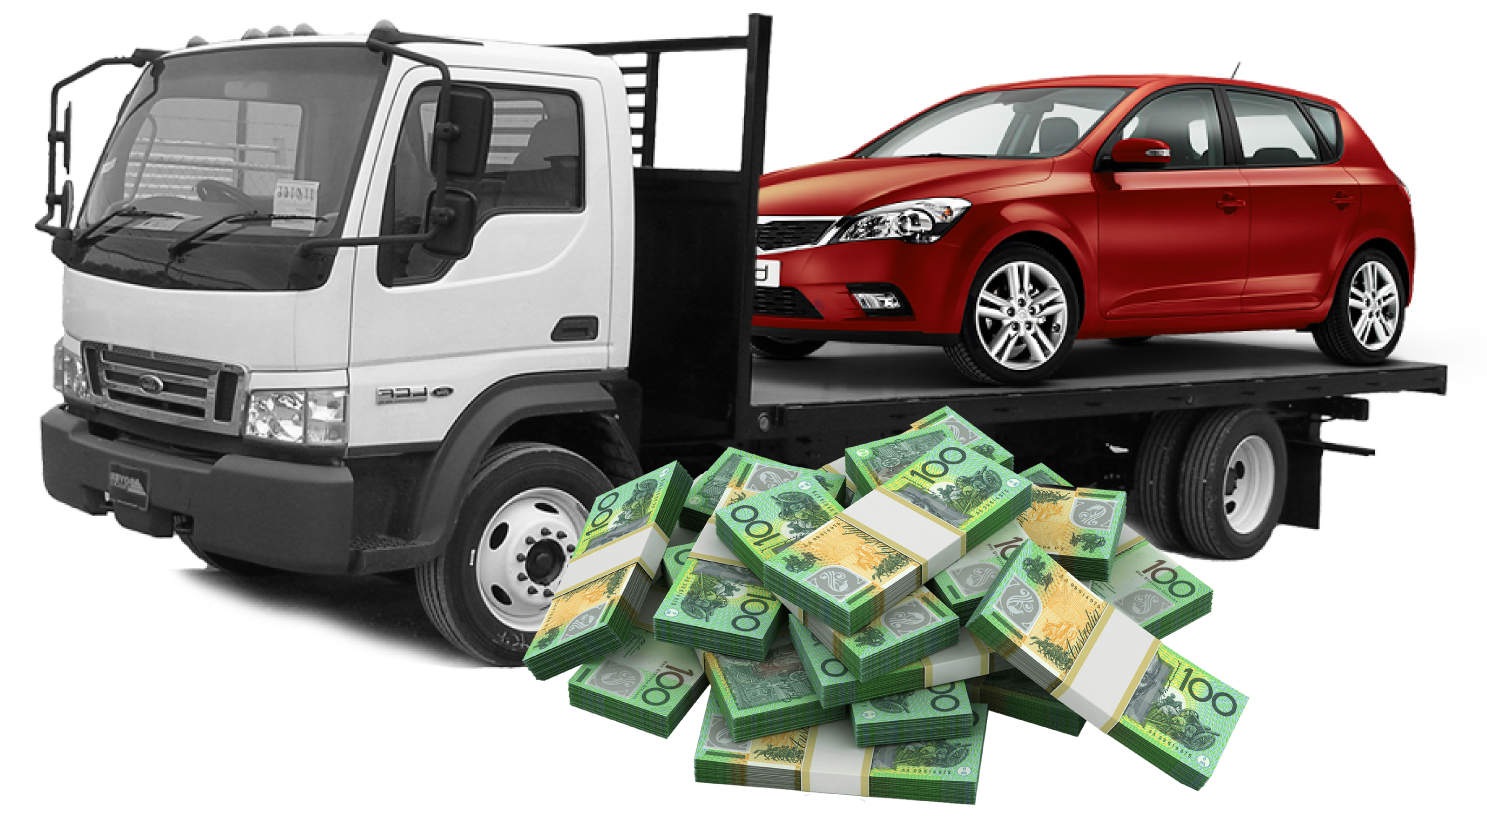 Cash for unwanted car Clayfield